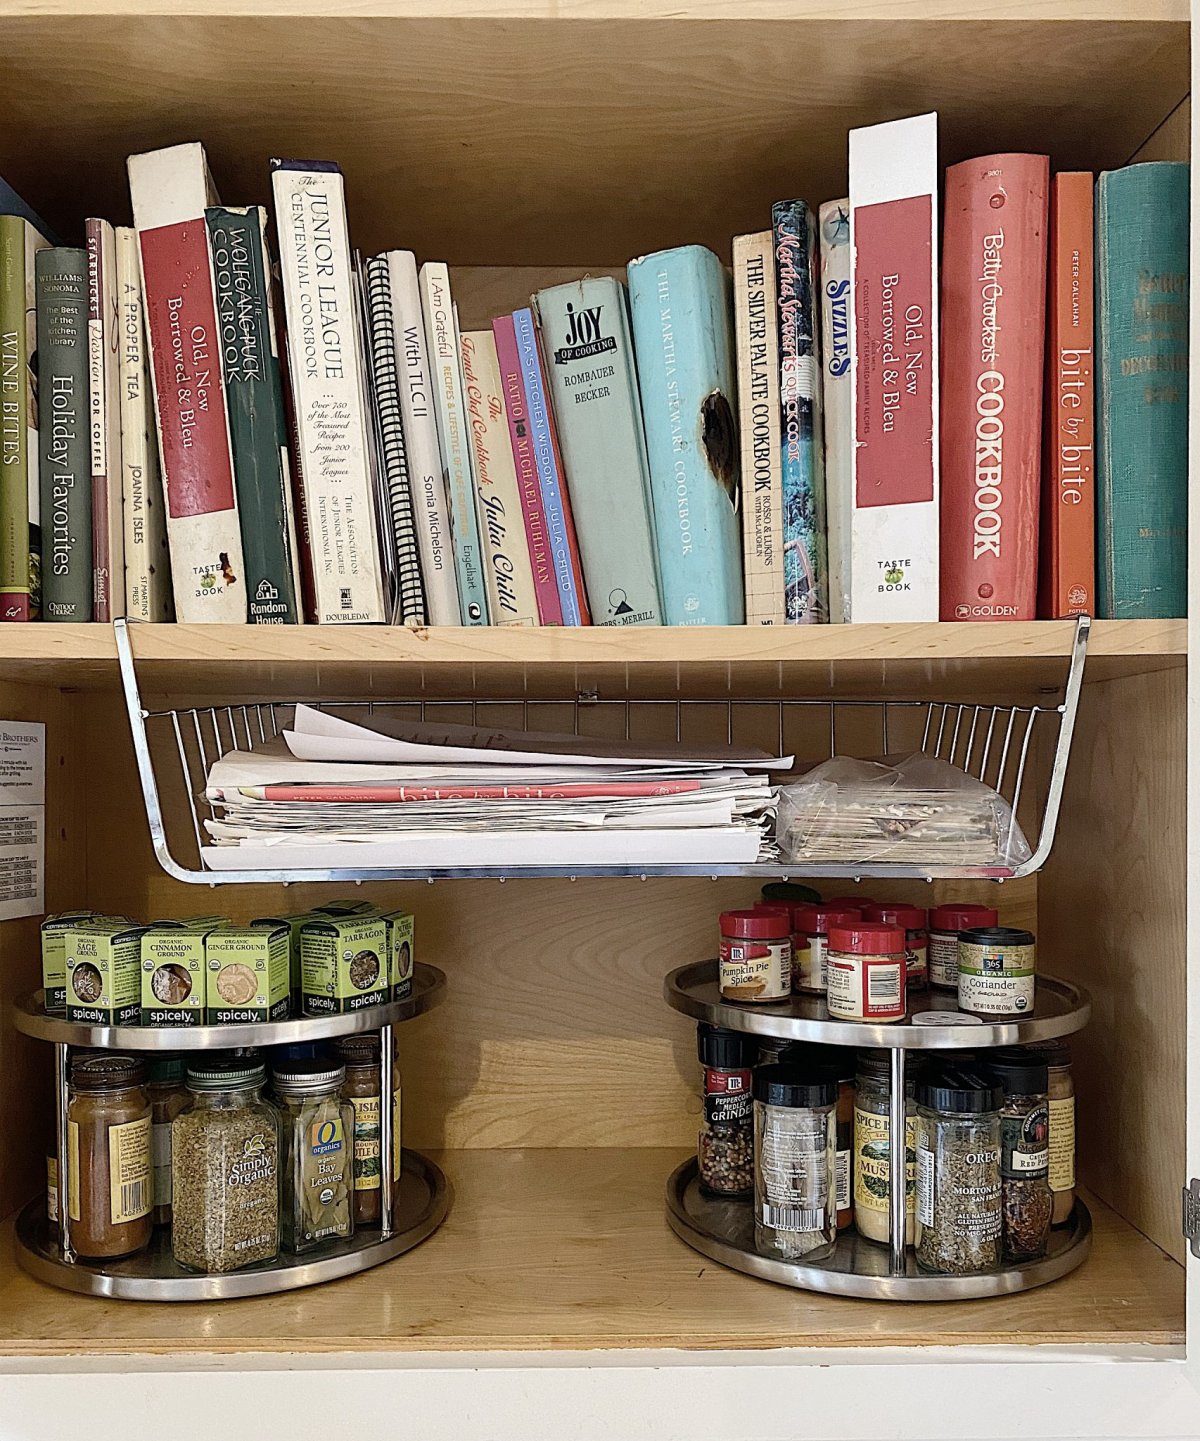 https://my100yearoldhome.com/wp-content/uploads/2019/12/tips-to-organizing-your-kitchen-pantry-scaled.jpg